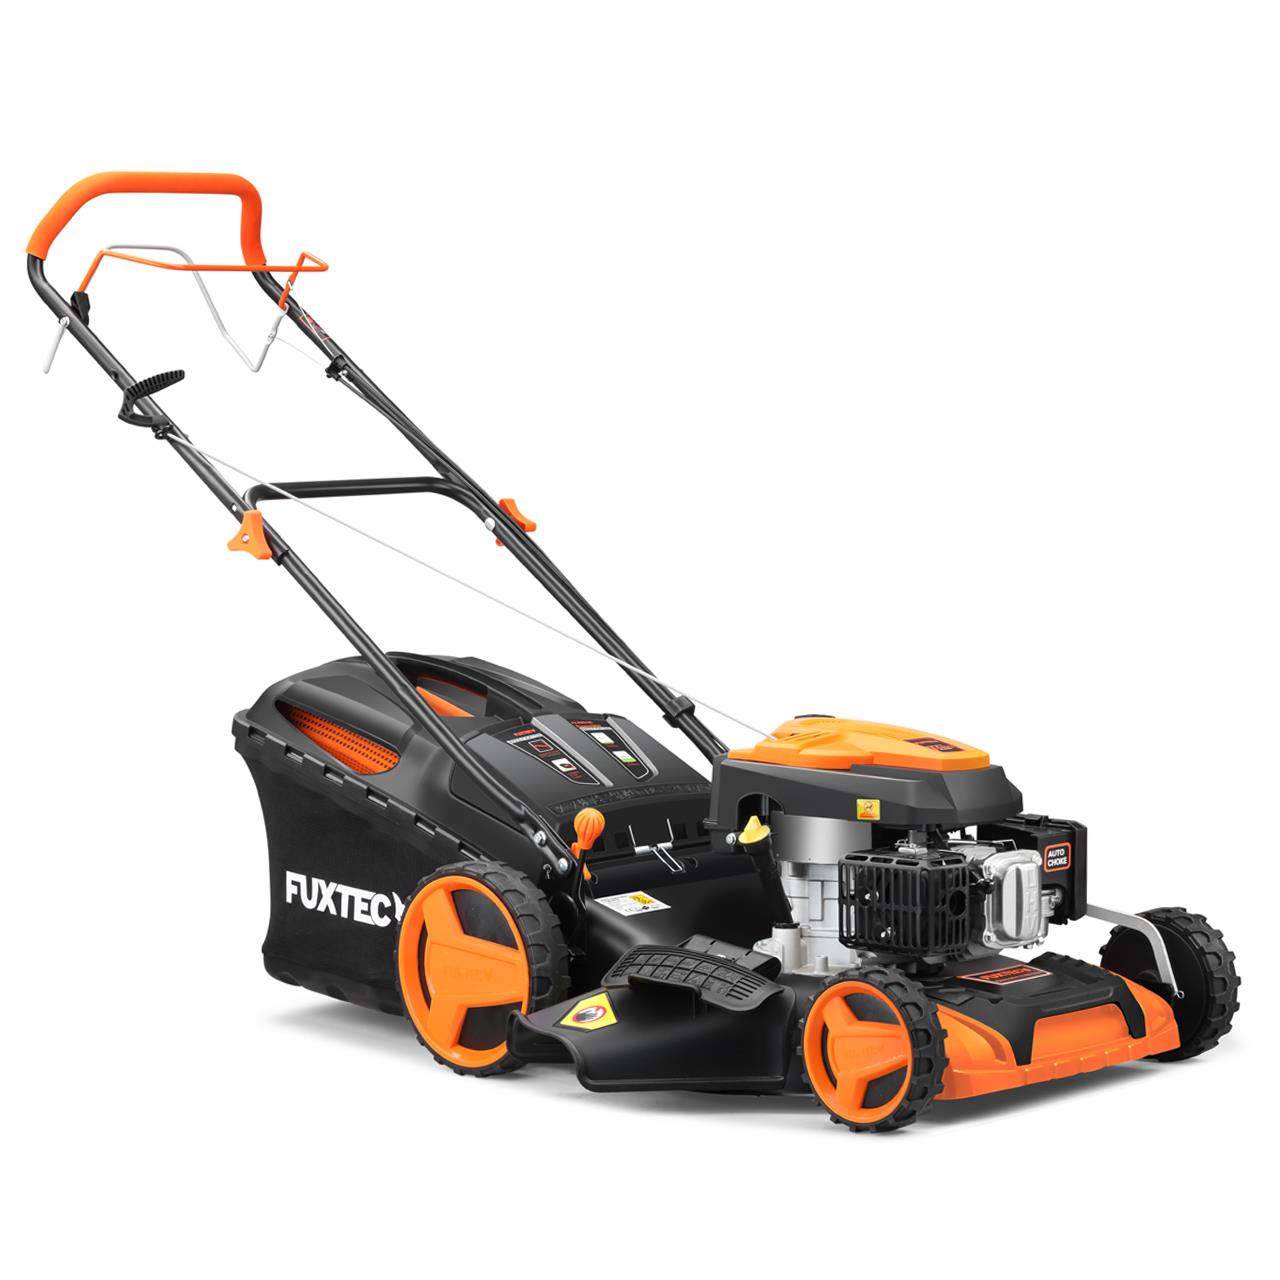 Petrol lawnmower 196cc cutting width 501mm -mowing, collecting, mulching, side discharge FUXTEC RM5196